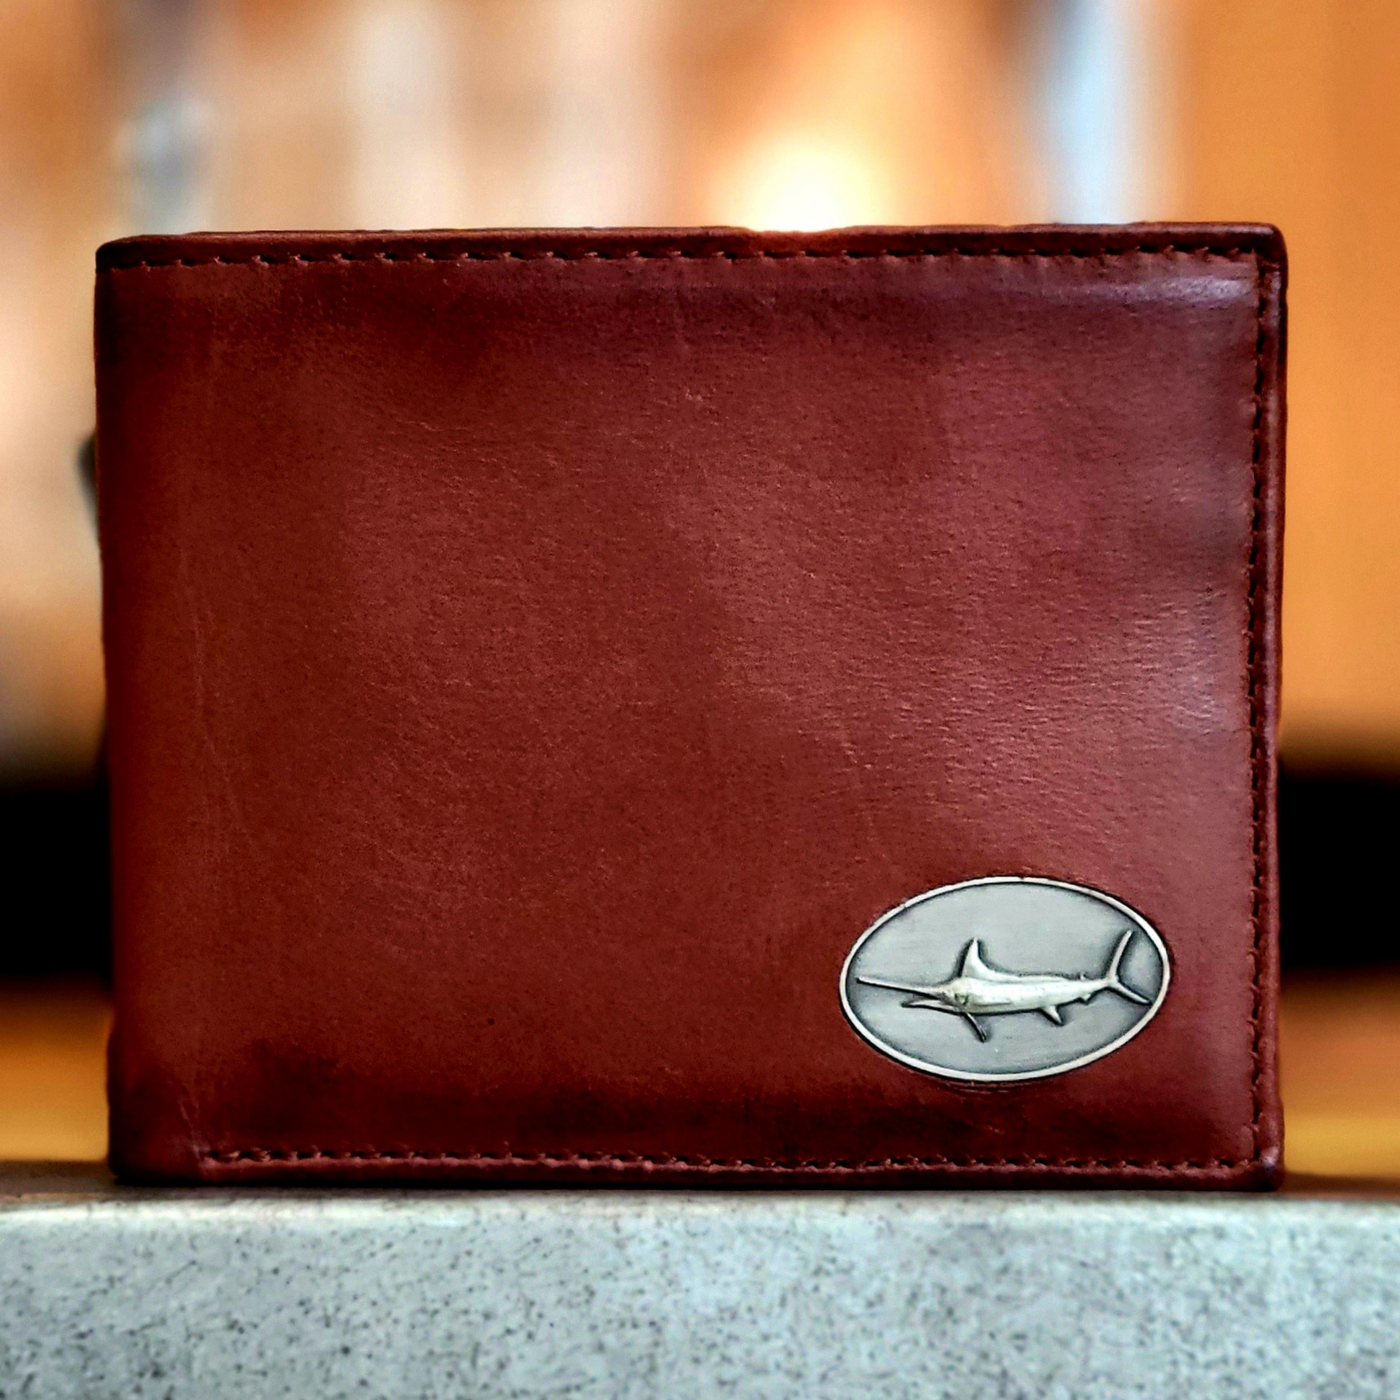 The Wildlife Bifold Marlin Wallet speaks volumes with its hand-burnished finish, signature marlin concho, and rich full grain leather. You won't be disappointed with this piece. 8 Card Slots 3 Storage Pockets 2 ID Windows Leather Tipped Bill Compartment Dimensions: 4.5"L x 3.5"H RFID Protection Color: Caramel